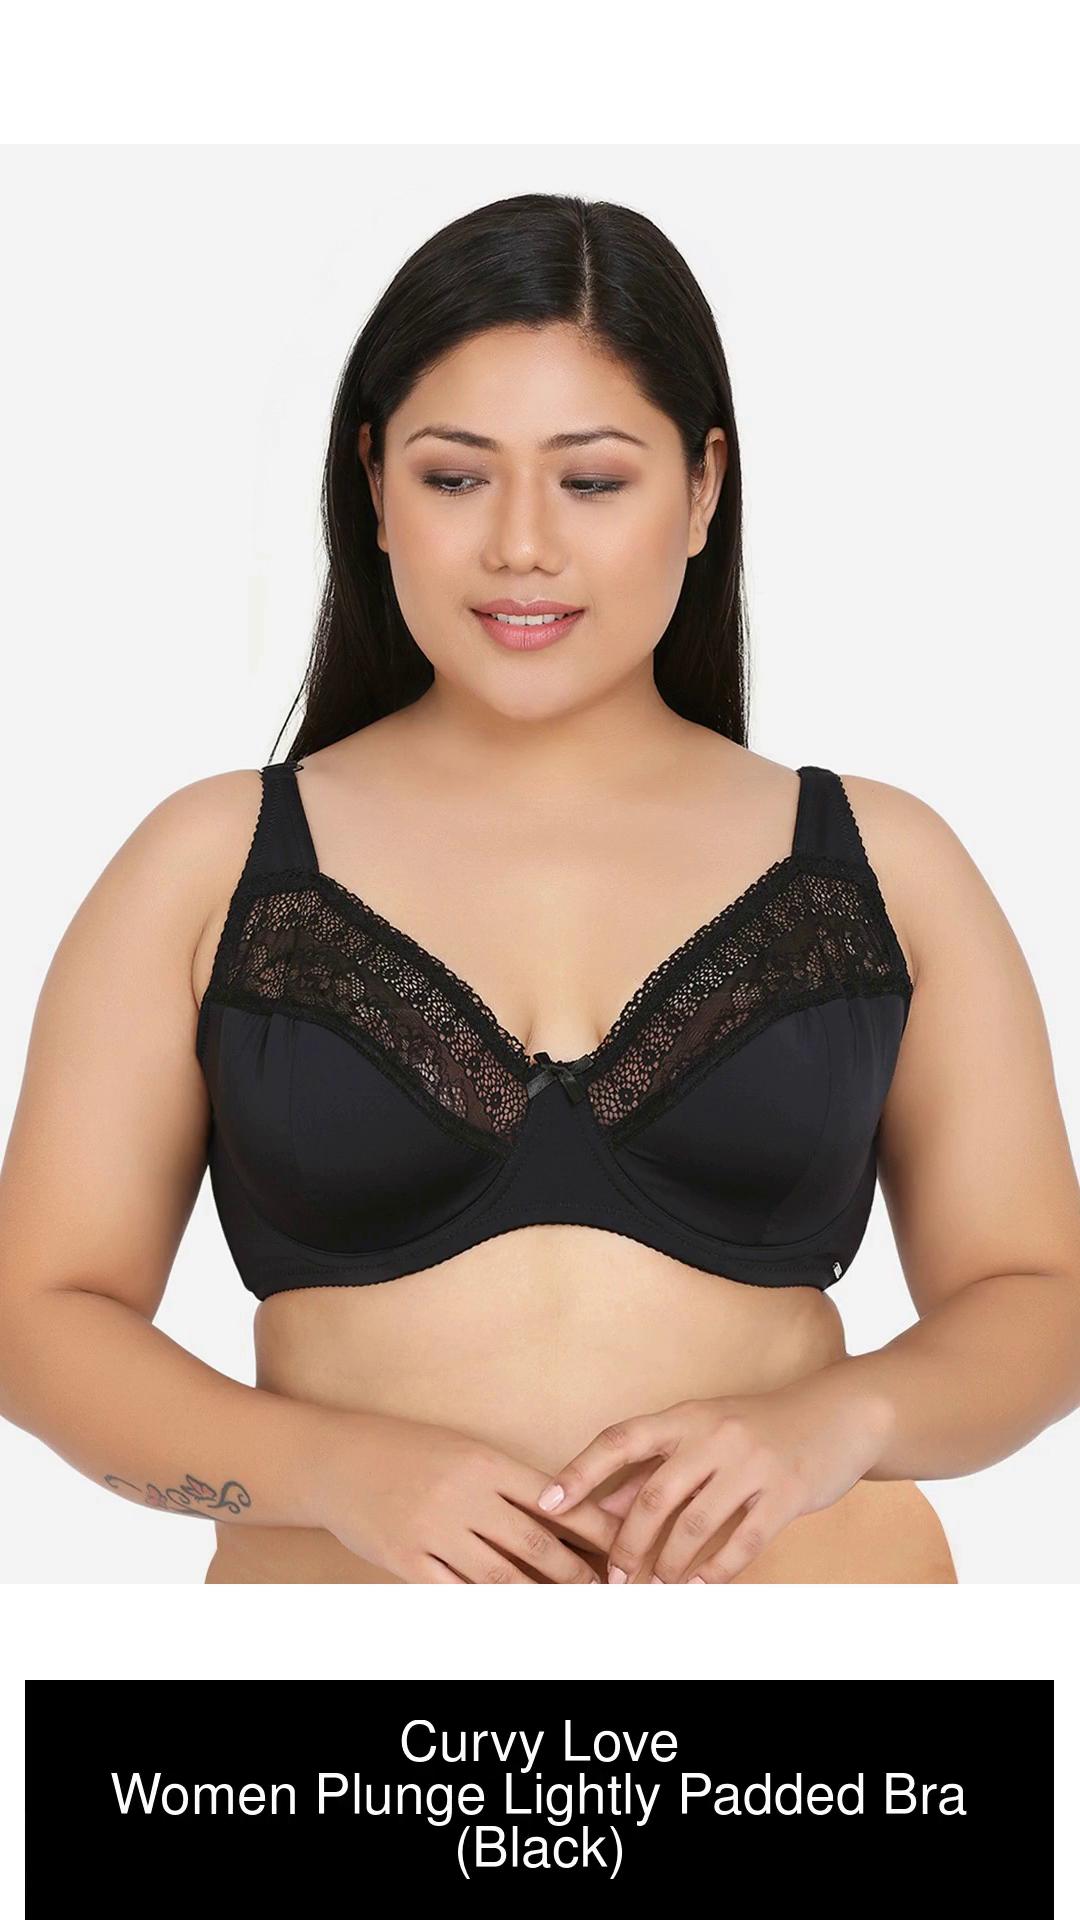 Curvy Love Plus Size Women Plunge Lightly Padded Bra - Buy Curvy Love Plus  Size Women Plunge Lightly Padded Bra Online at Best Prices in India